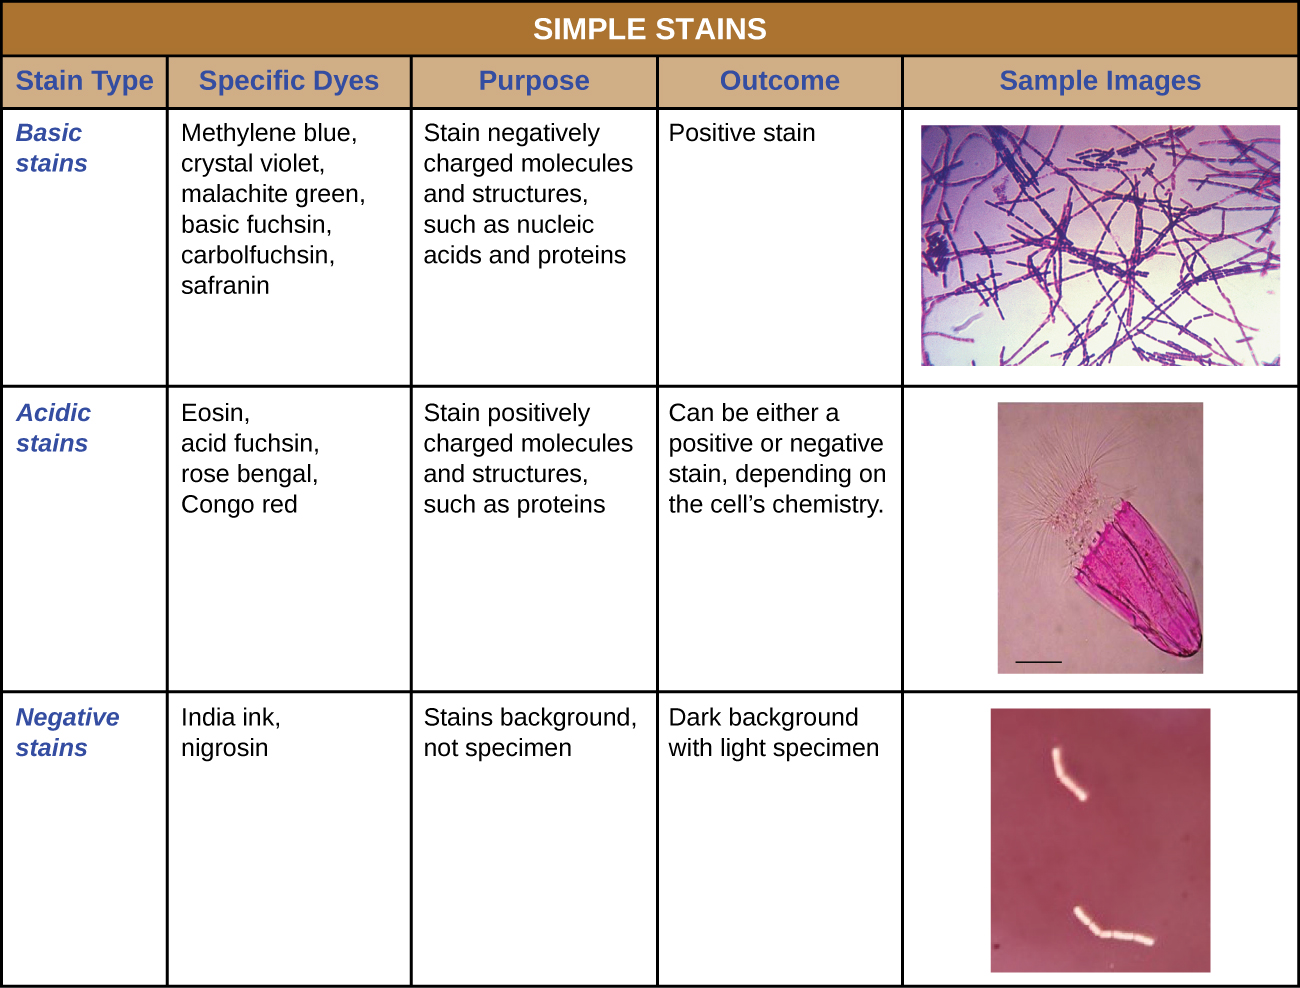 A table of simple stains is shown. Basic stains include: methylene blue, crystal violet, malachite green, basic fuschsin, carbolfuschsin, and safranin. Basic stains stain negatively charged molecules and structures, such as nucleic acids and proteins. The outcome of this positive stain is dark cells on a light background. Acidic stains include eosine, acid fuchsin, rose Bengal, and Congo red. Acid stains stain positively charged molecules and structures such as proteins. Acidic stains can either be positive or negative stains depending on the cell’s chemistry. Negative stains include india in k and nigrosine. Negative stains stain the background, not the specimen and produce a dark background with a light specimen.